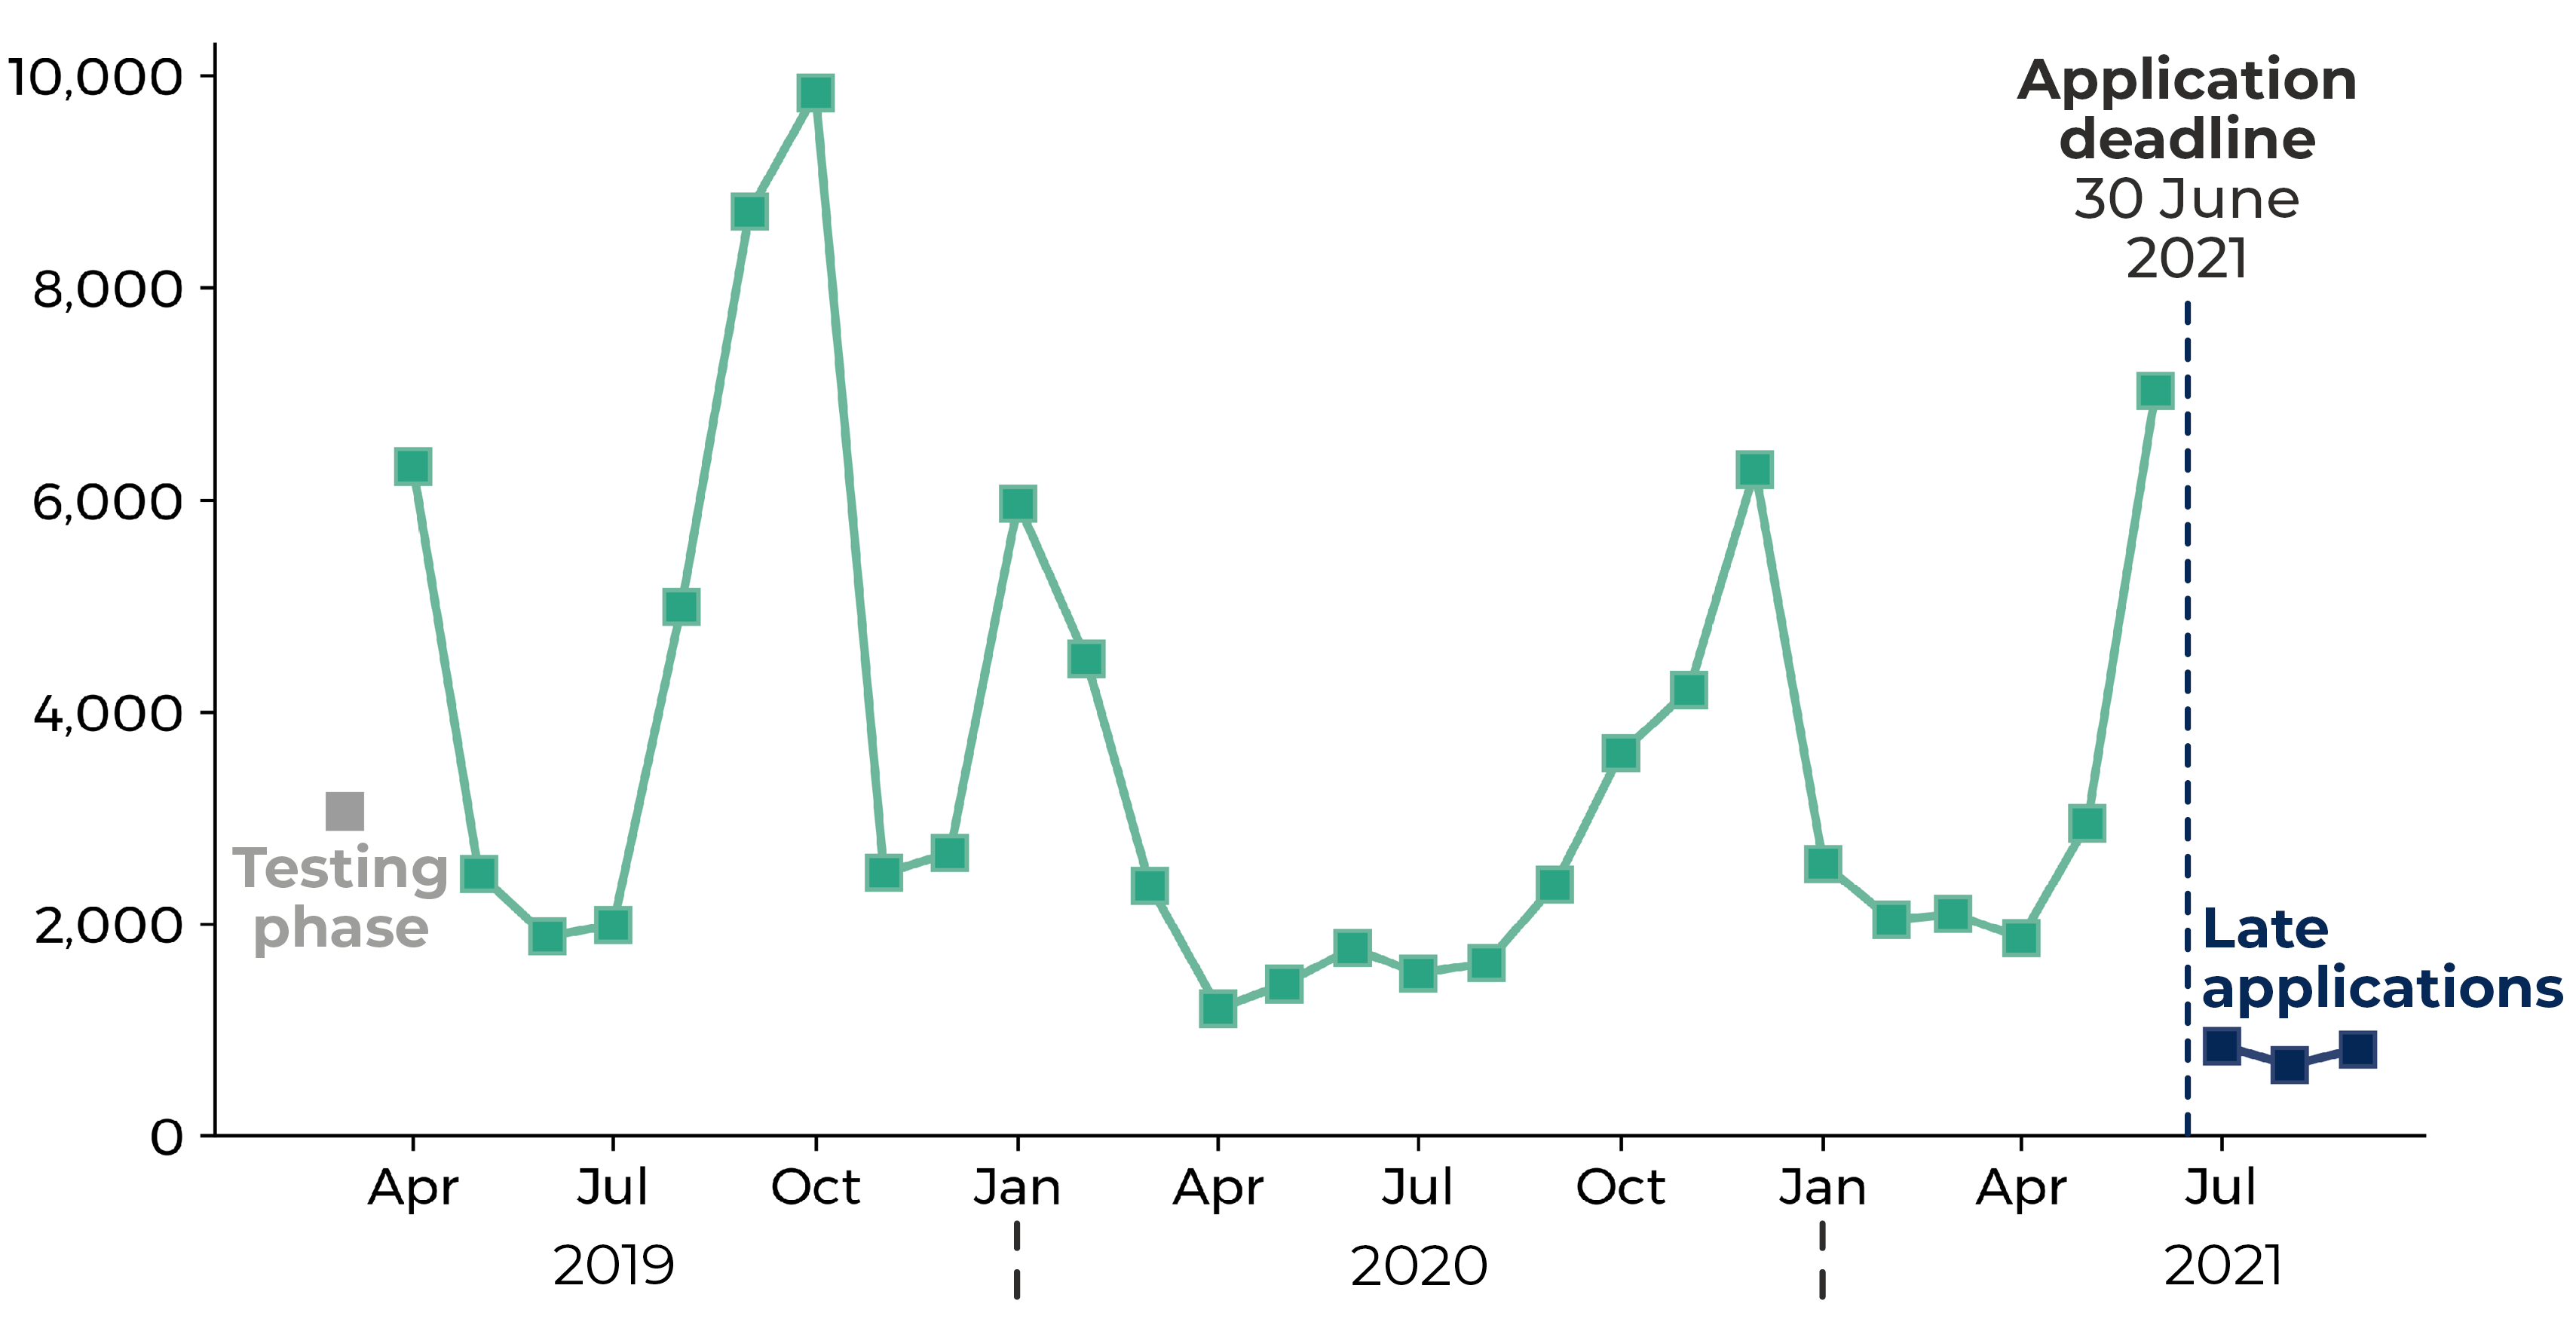 Graph showing the number of applications to the EUSS from Wales by month since the scheme opened in March 2019. The number of applications varied between 1000 and 10000 and was at its highest (9840) in October 2019. Other peaks around 6000 to 7000 monthly applications occurred in April 2019, January 2020, December 2020 and June 2021. Late applications in the 3 months beyond the 30 June 2021 deadline were less than 1000 per month.